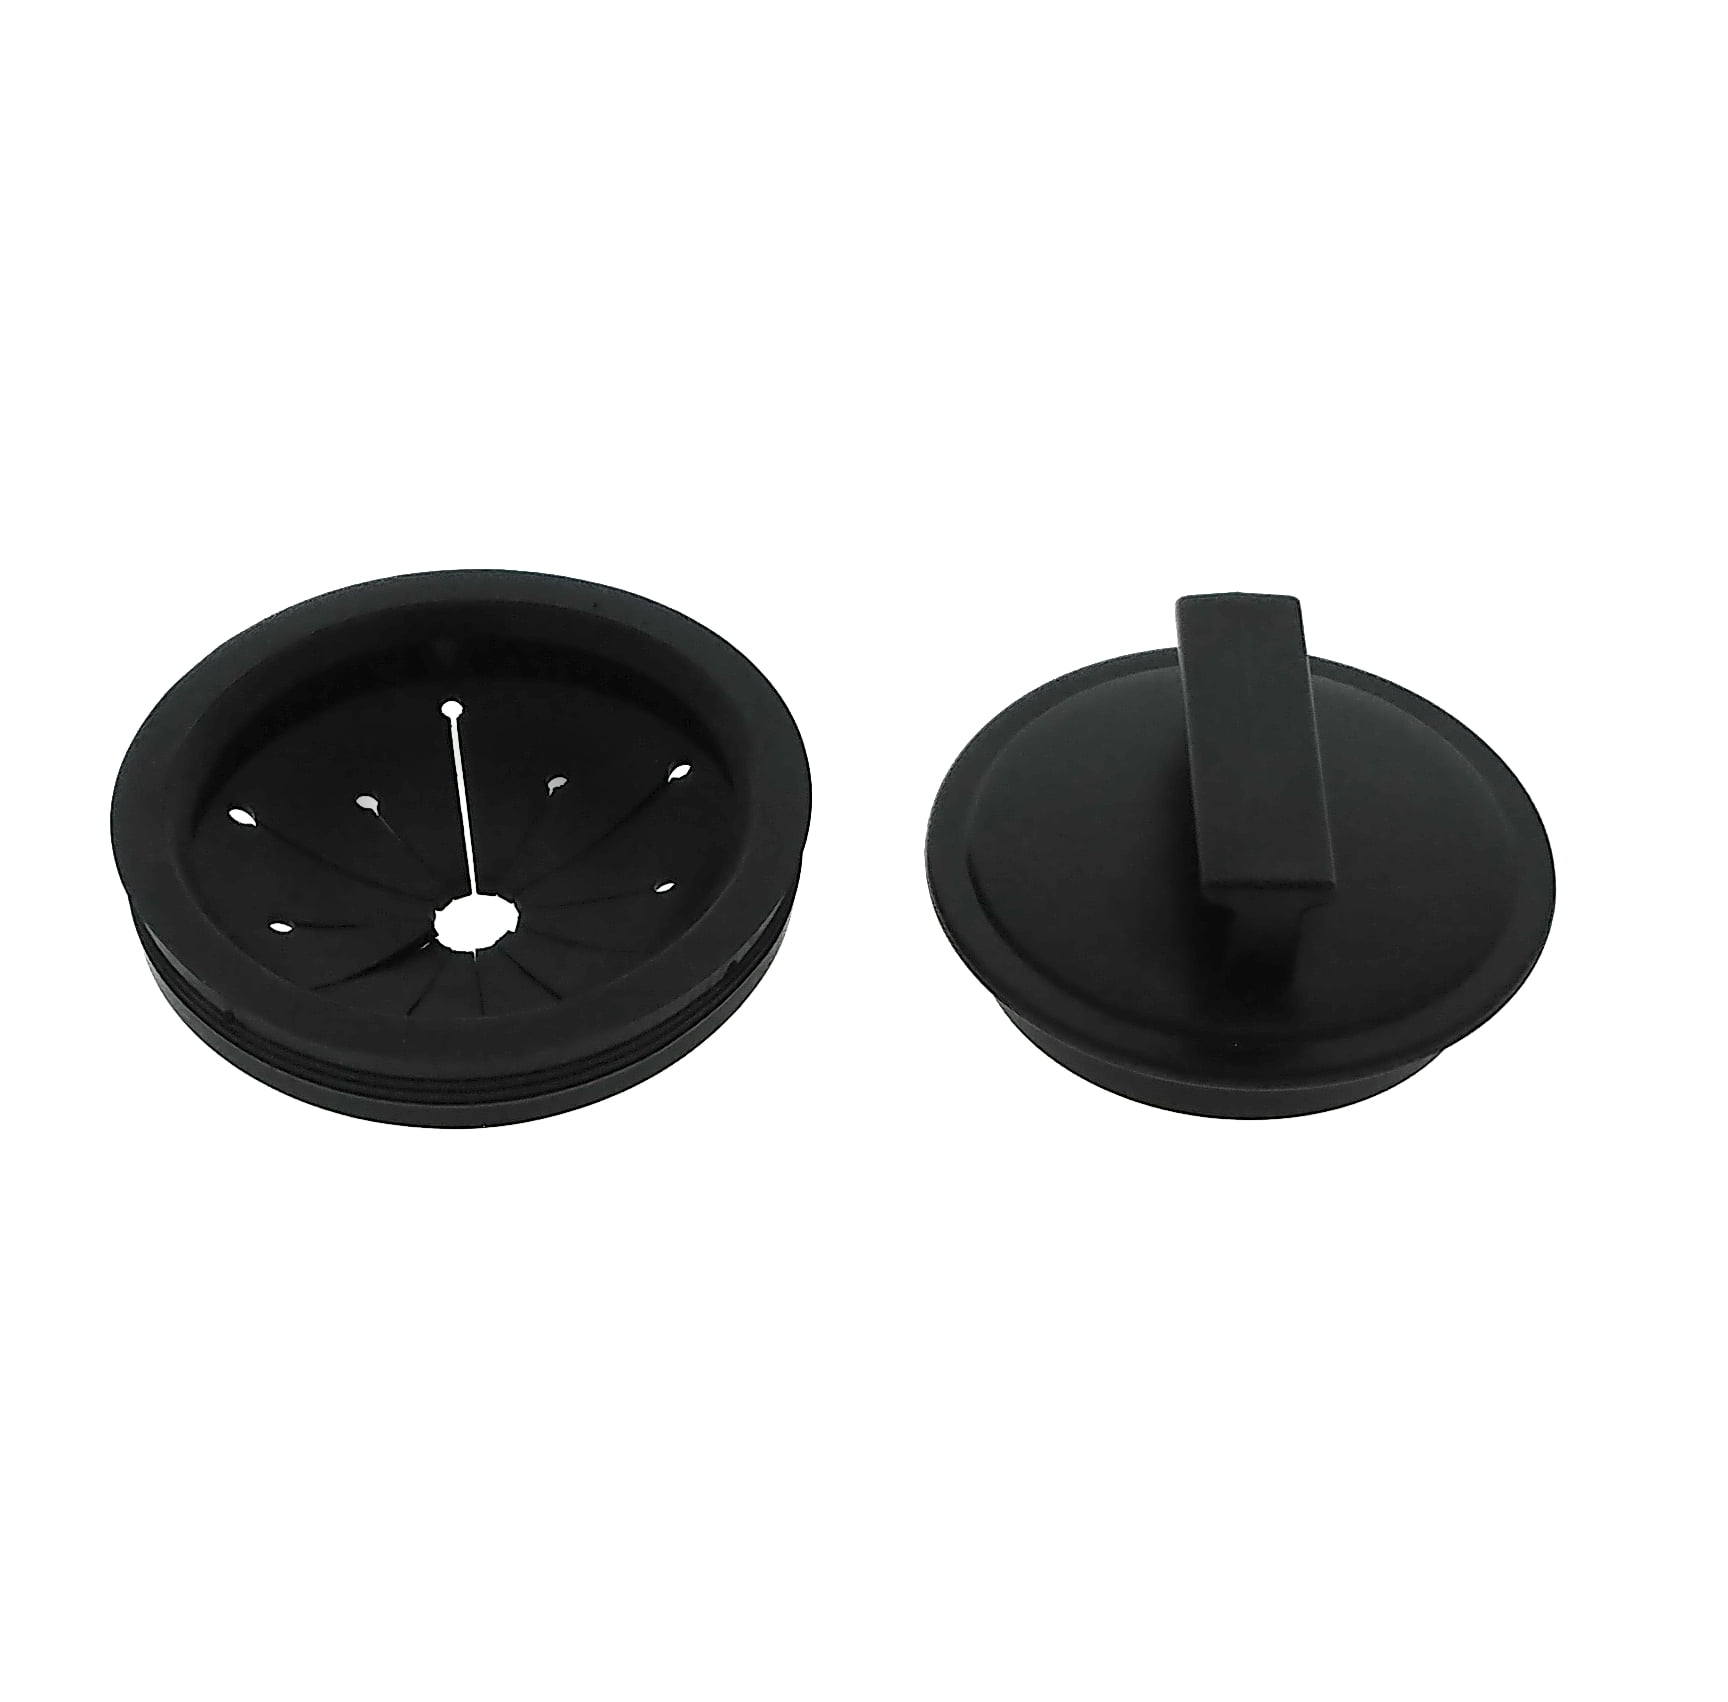 for sale online Plastic Garbage Disposal Sink Stopper W/rubber Seal 